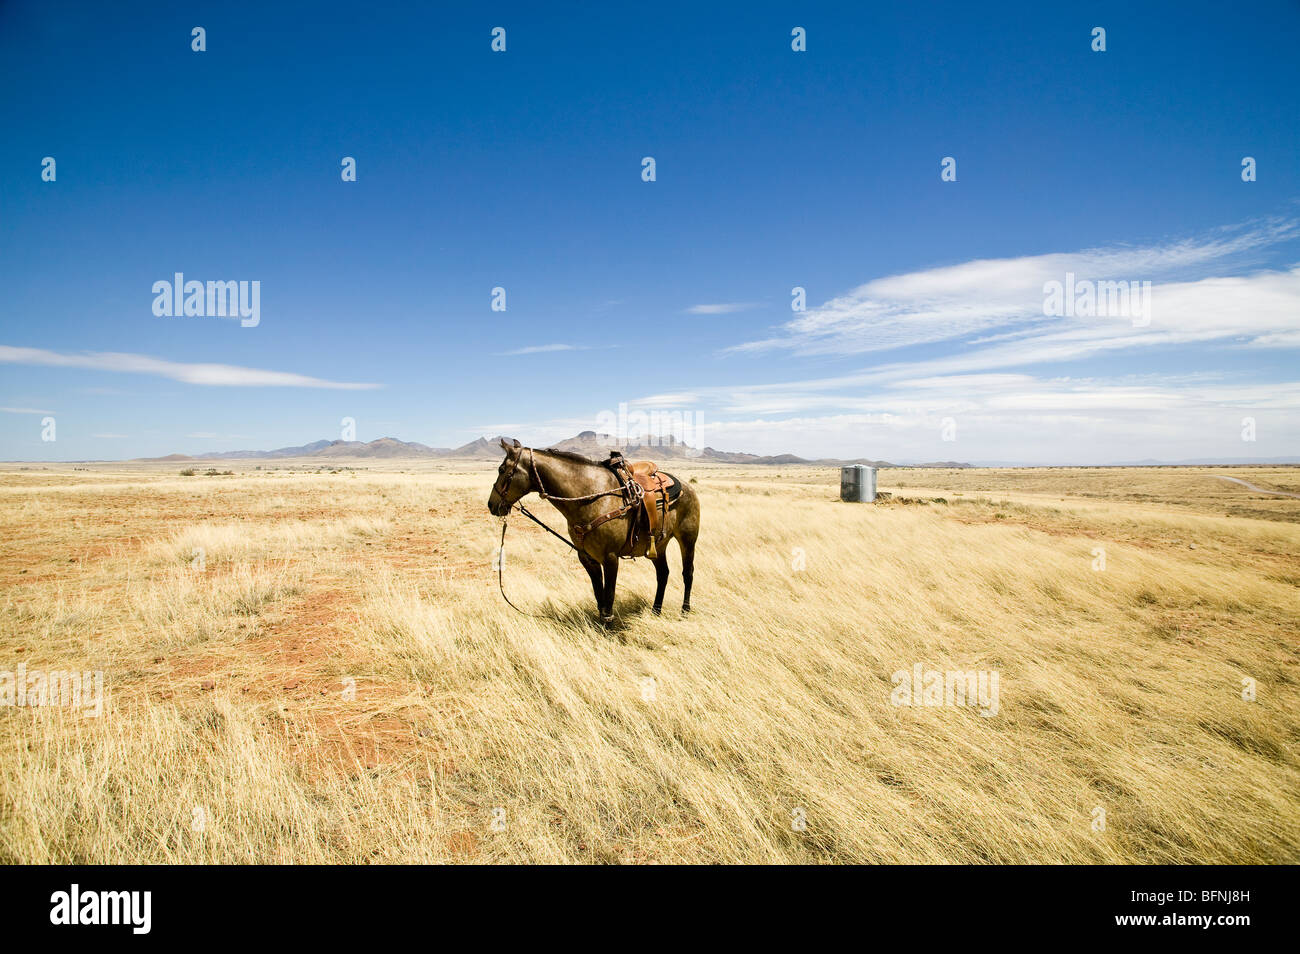 A riderless horse stands alone in an open range. Stock Photo